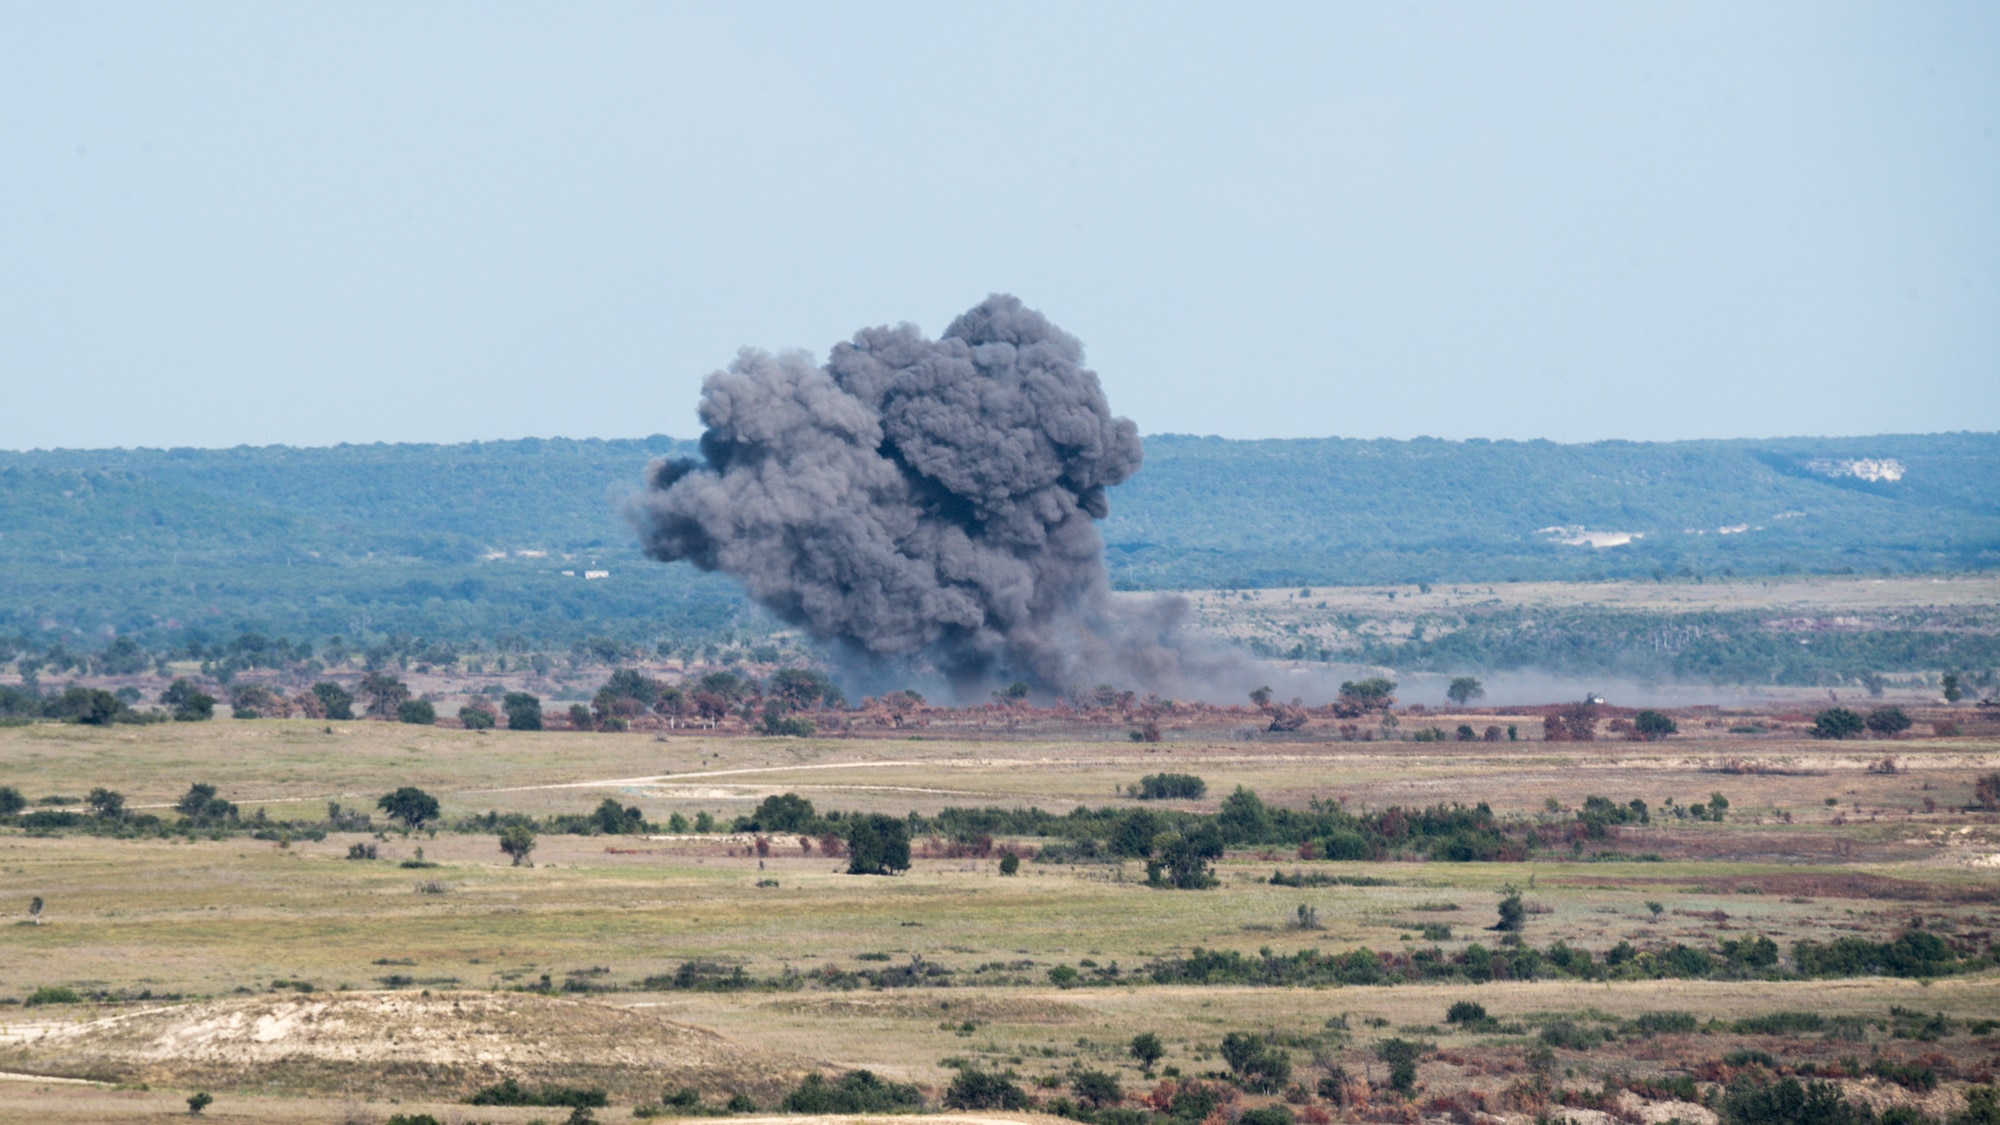 Dropped munitions create an explosion during Exercise Pegasus Forge at Fort Hood, Texas, Aug. 11, 2020. The event took 45 days in the field leading up to the last full day filled with a fires coordination exercise. (U.S. Air Force photo by Senior Airman Lillian Miller)